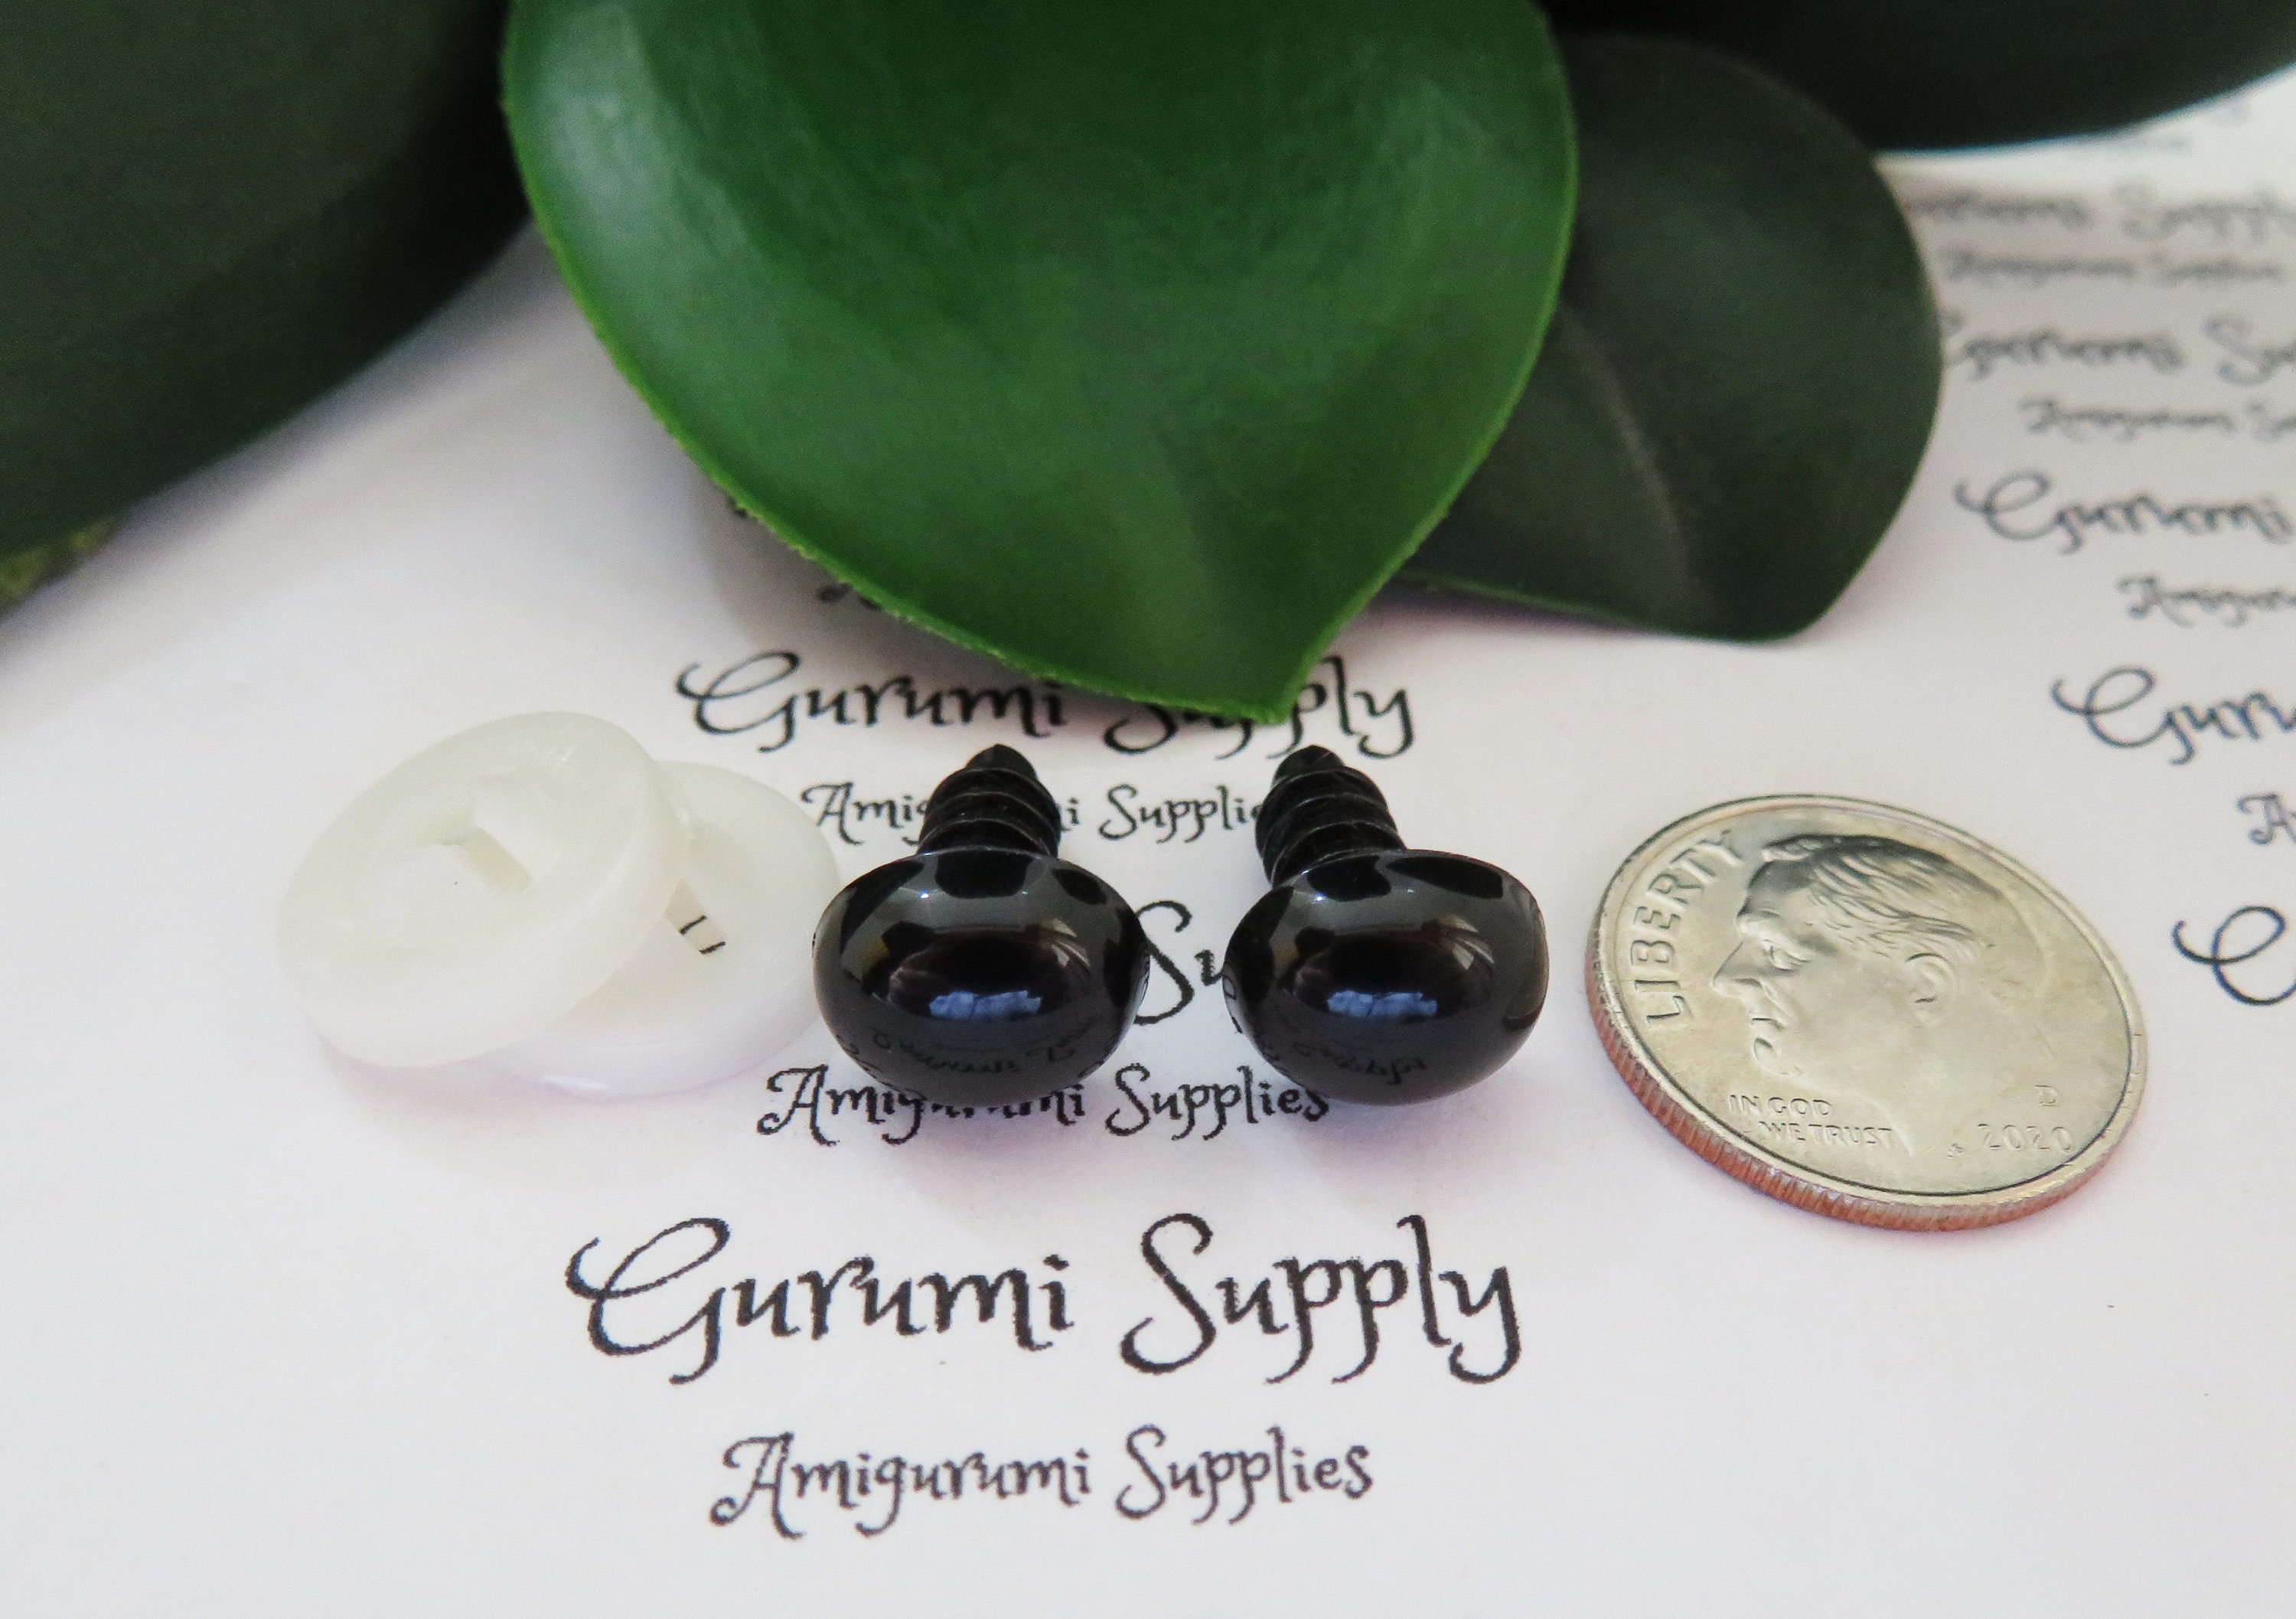 8x12mm Solid Black Oval Safety Eyes/Noses with Washers: 2 Pair - Amigurumi/  Animals/ Doll/ Toy/ Stuffed Creations/ Craft Eyes/ Crochet/ Knit